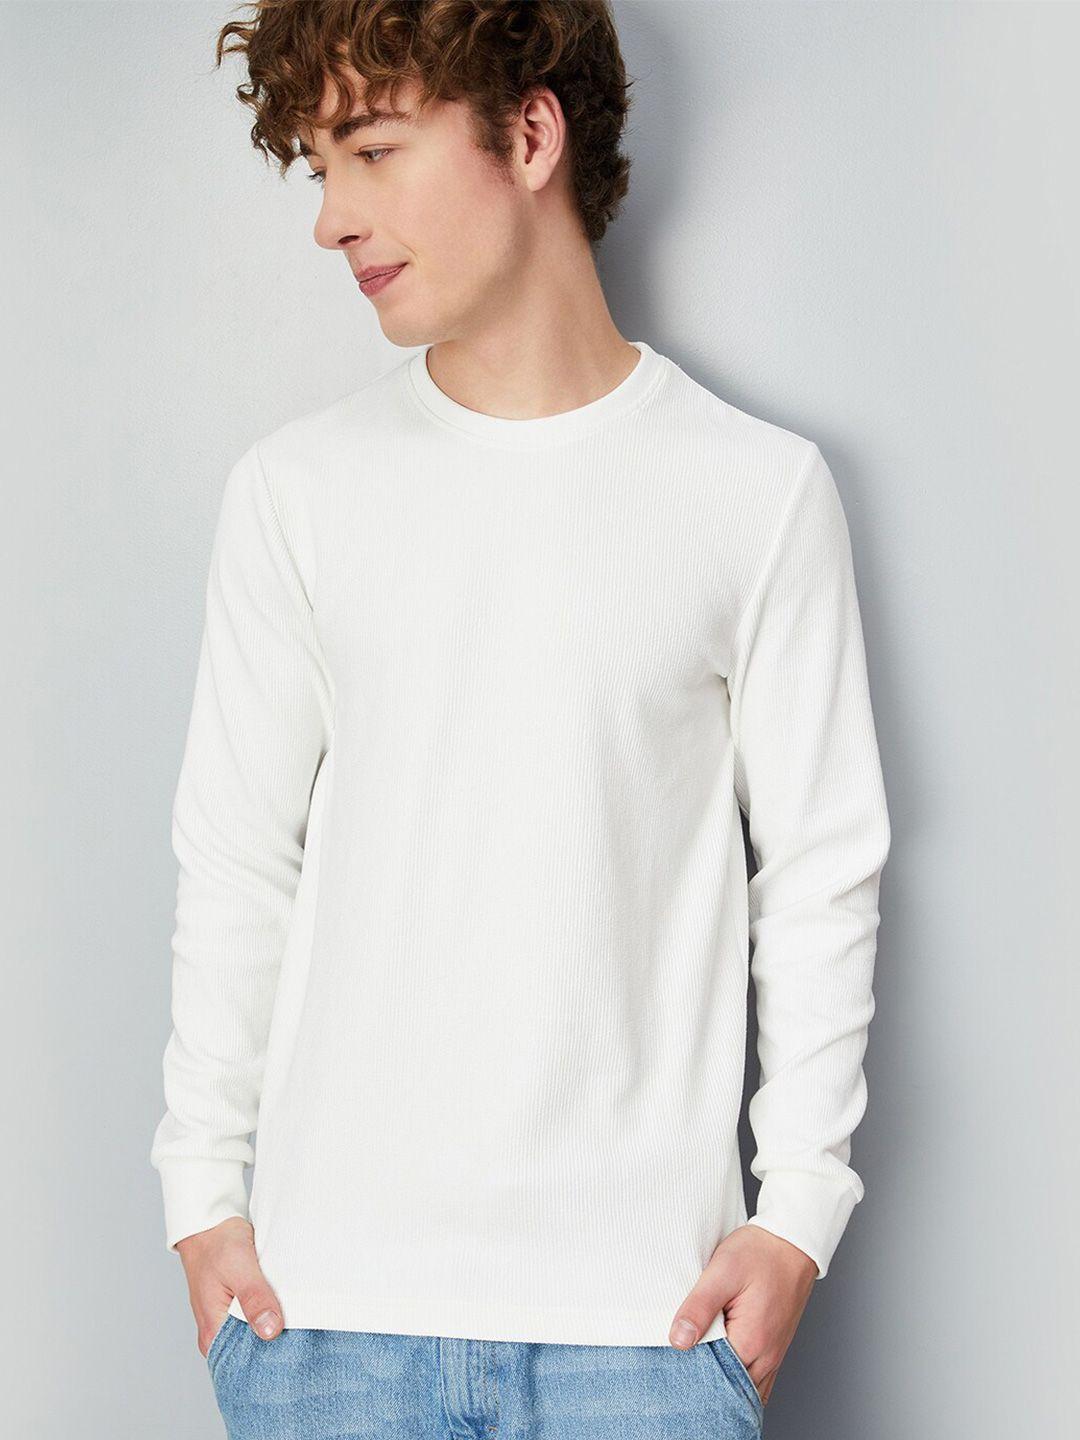 max-round-neck-long-sleeves-t-shirt